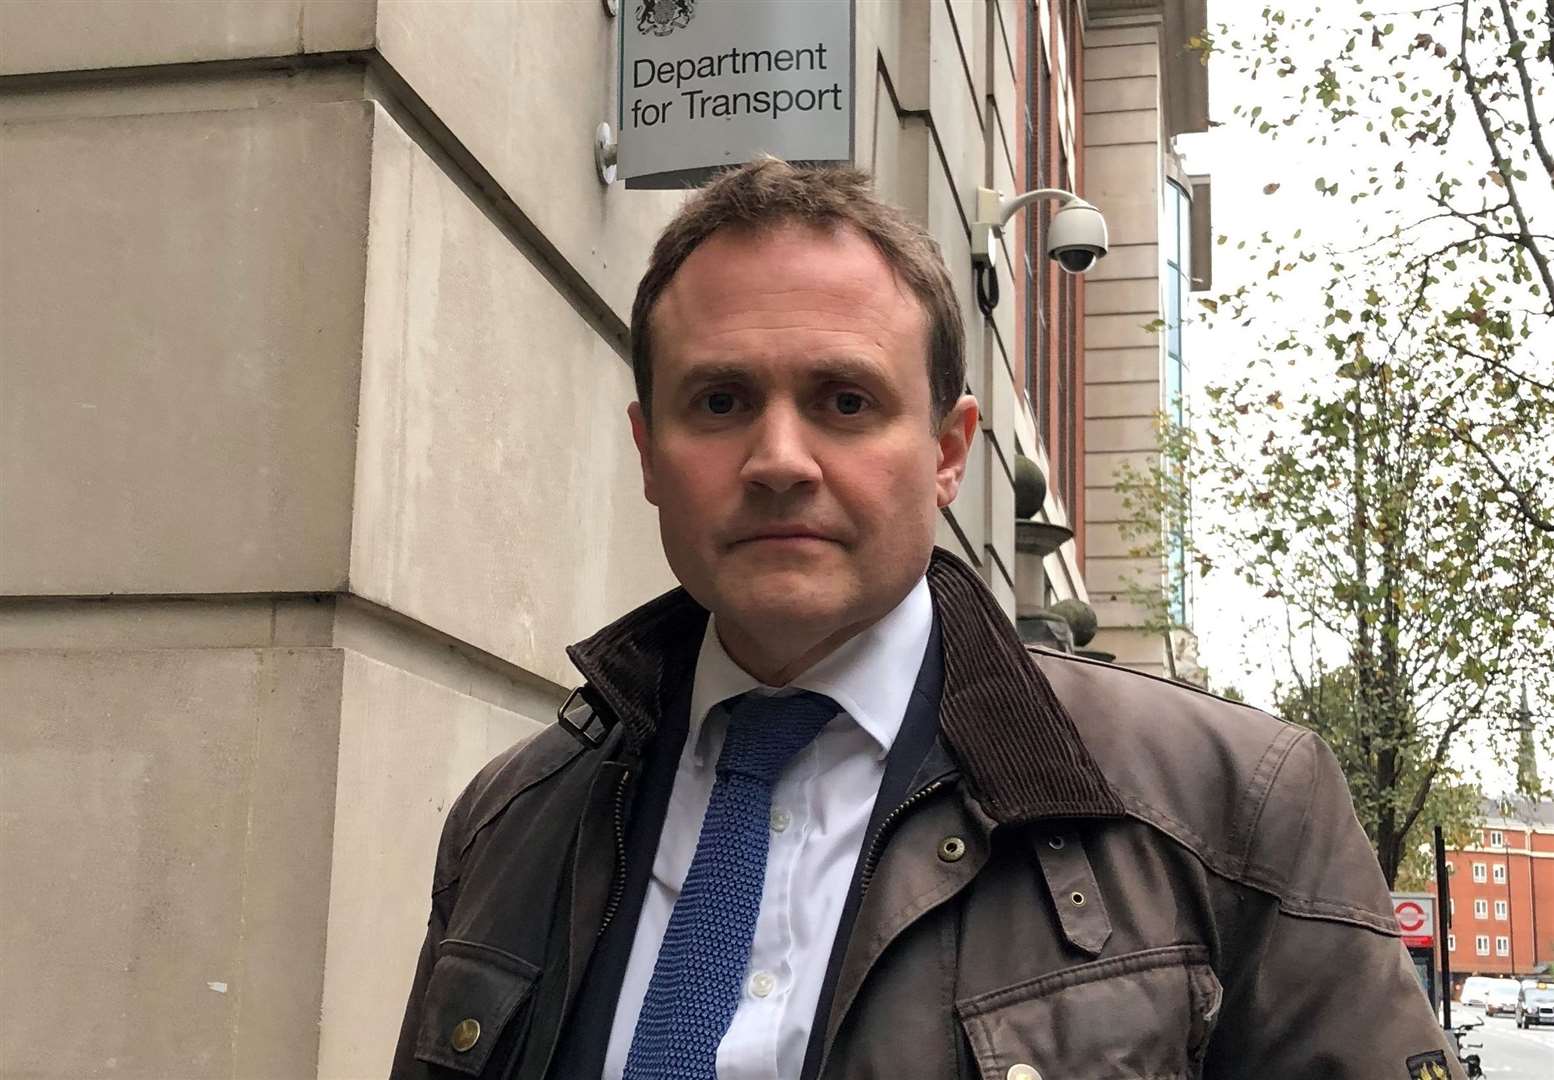 Tonbridge and Malling MP Tom Tugendhat put the request to the Rail Minister today